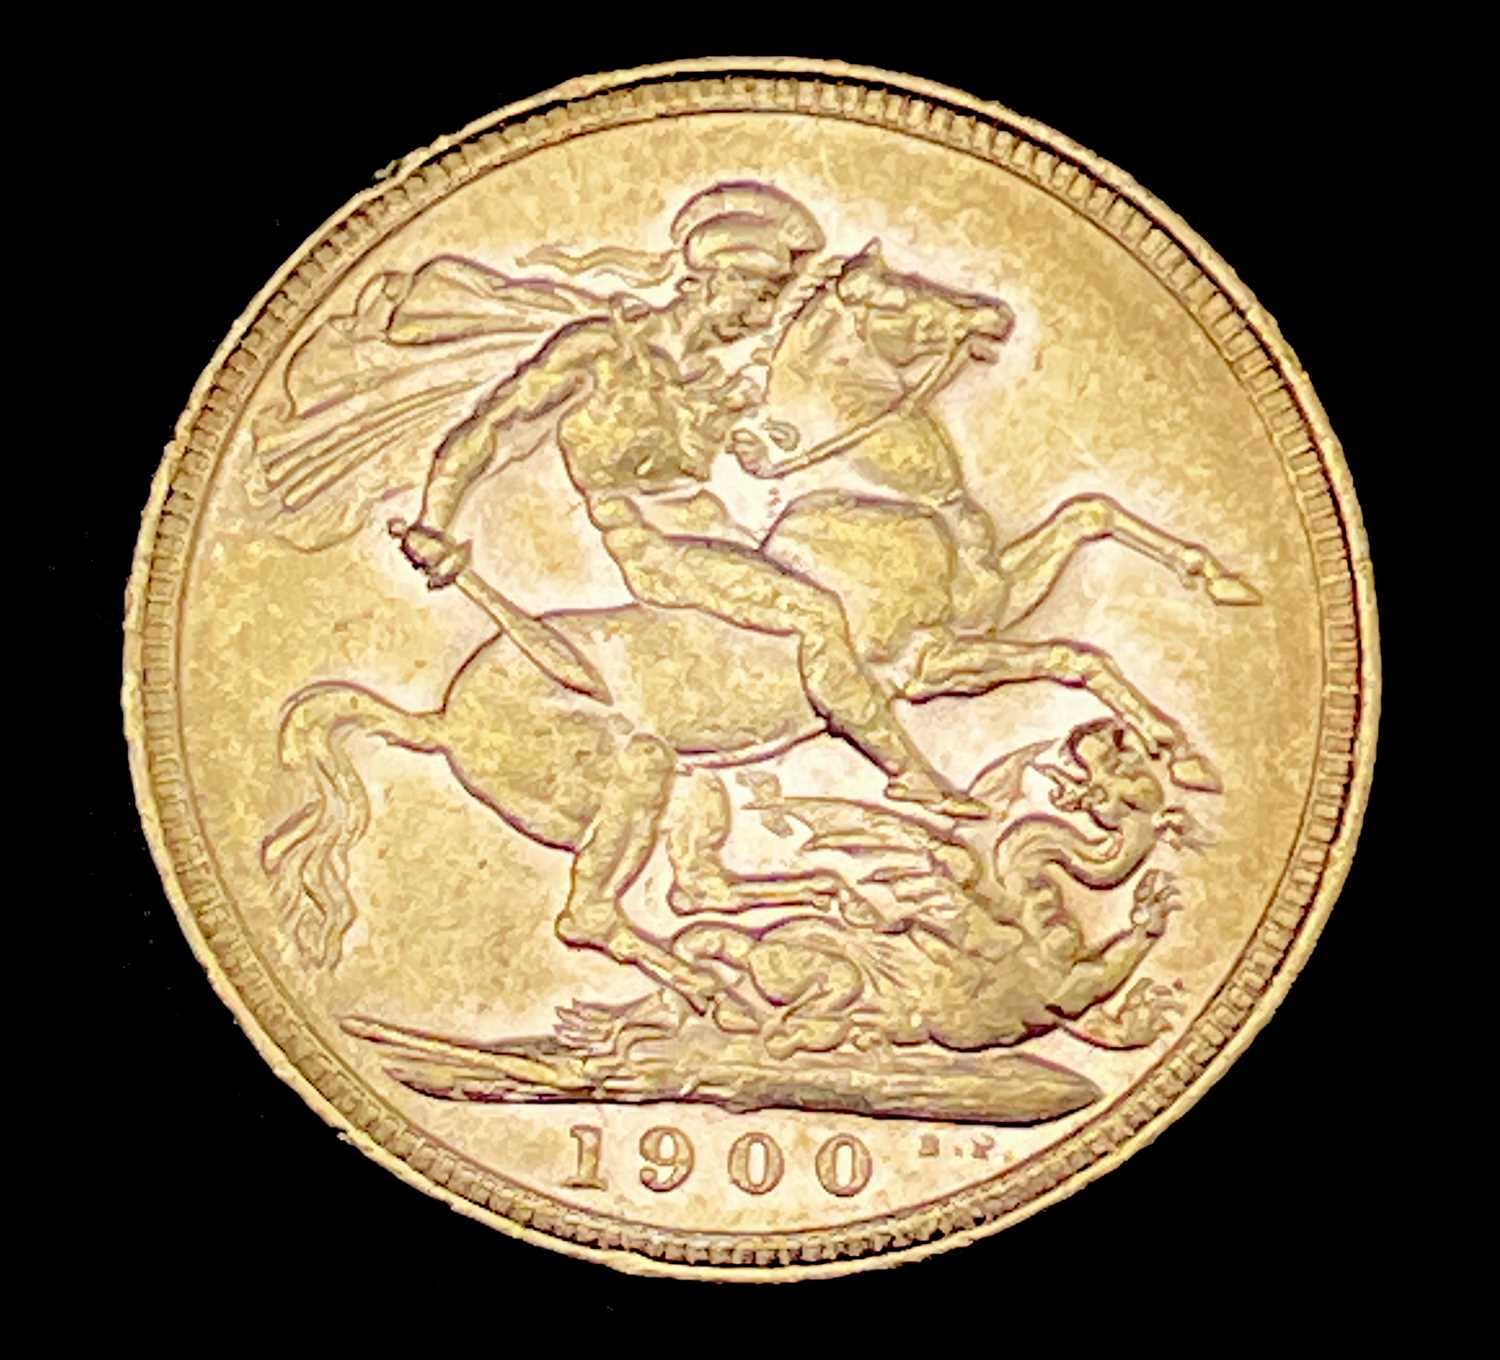 Lot 22 - Great Britain Gold Sovereign 1900 Veiled Head